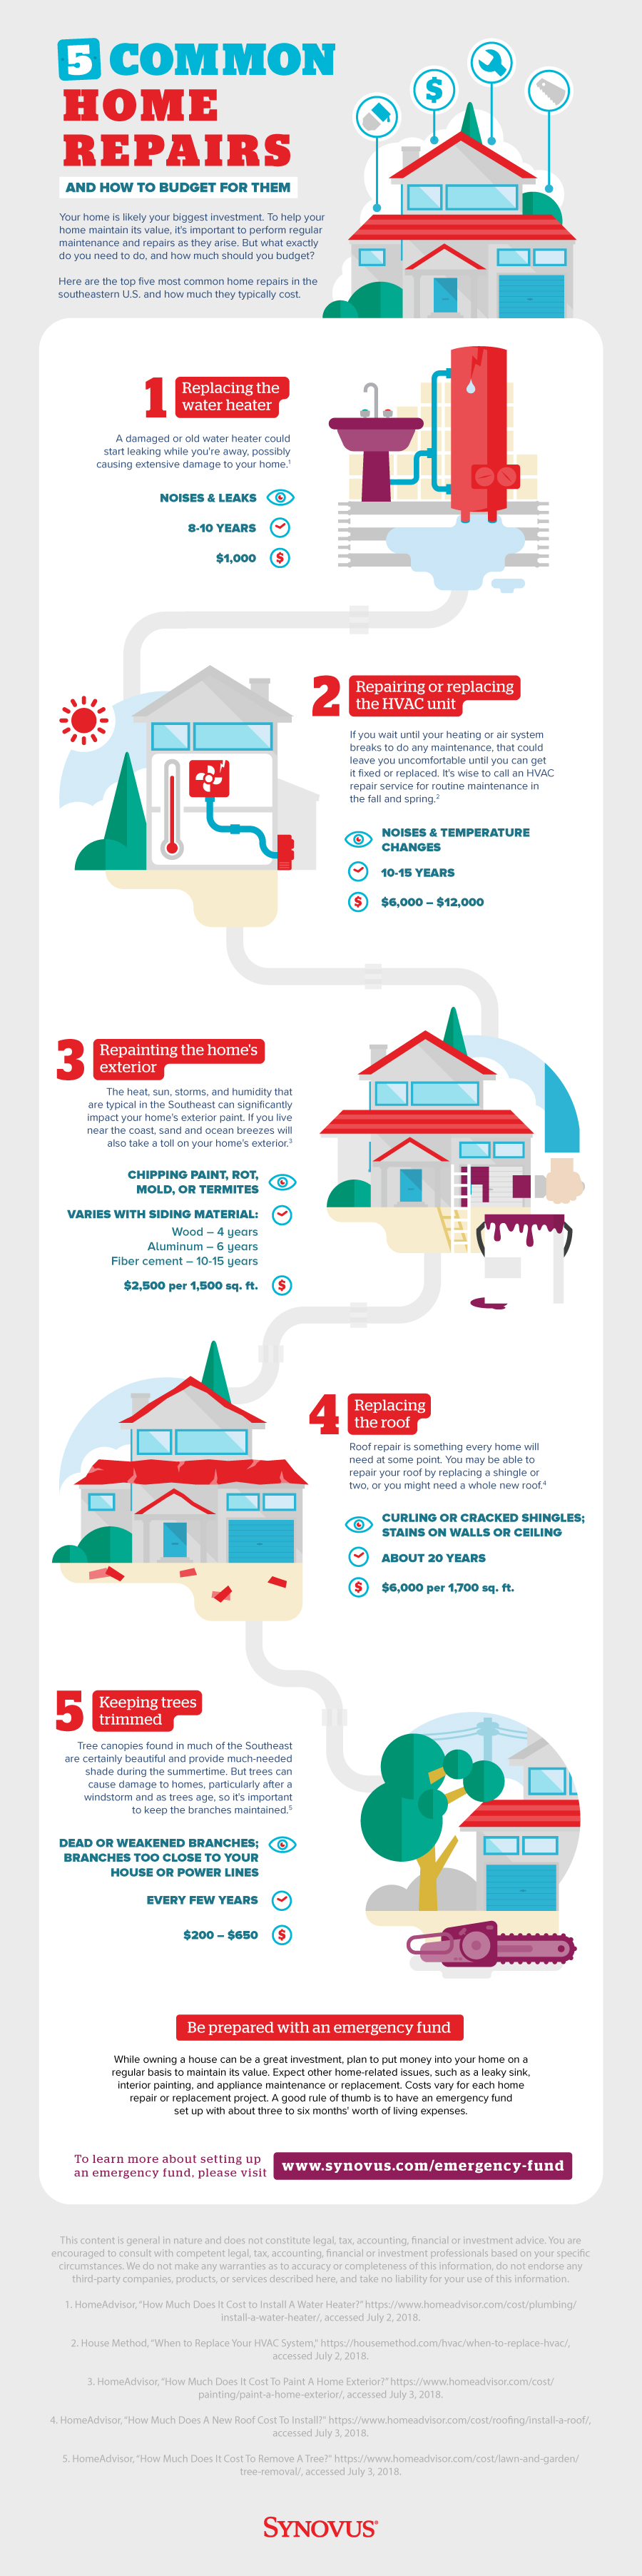 Infographic describing five common home repairs and how to budget for them. A full description is available through a link beneath the image.